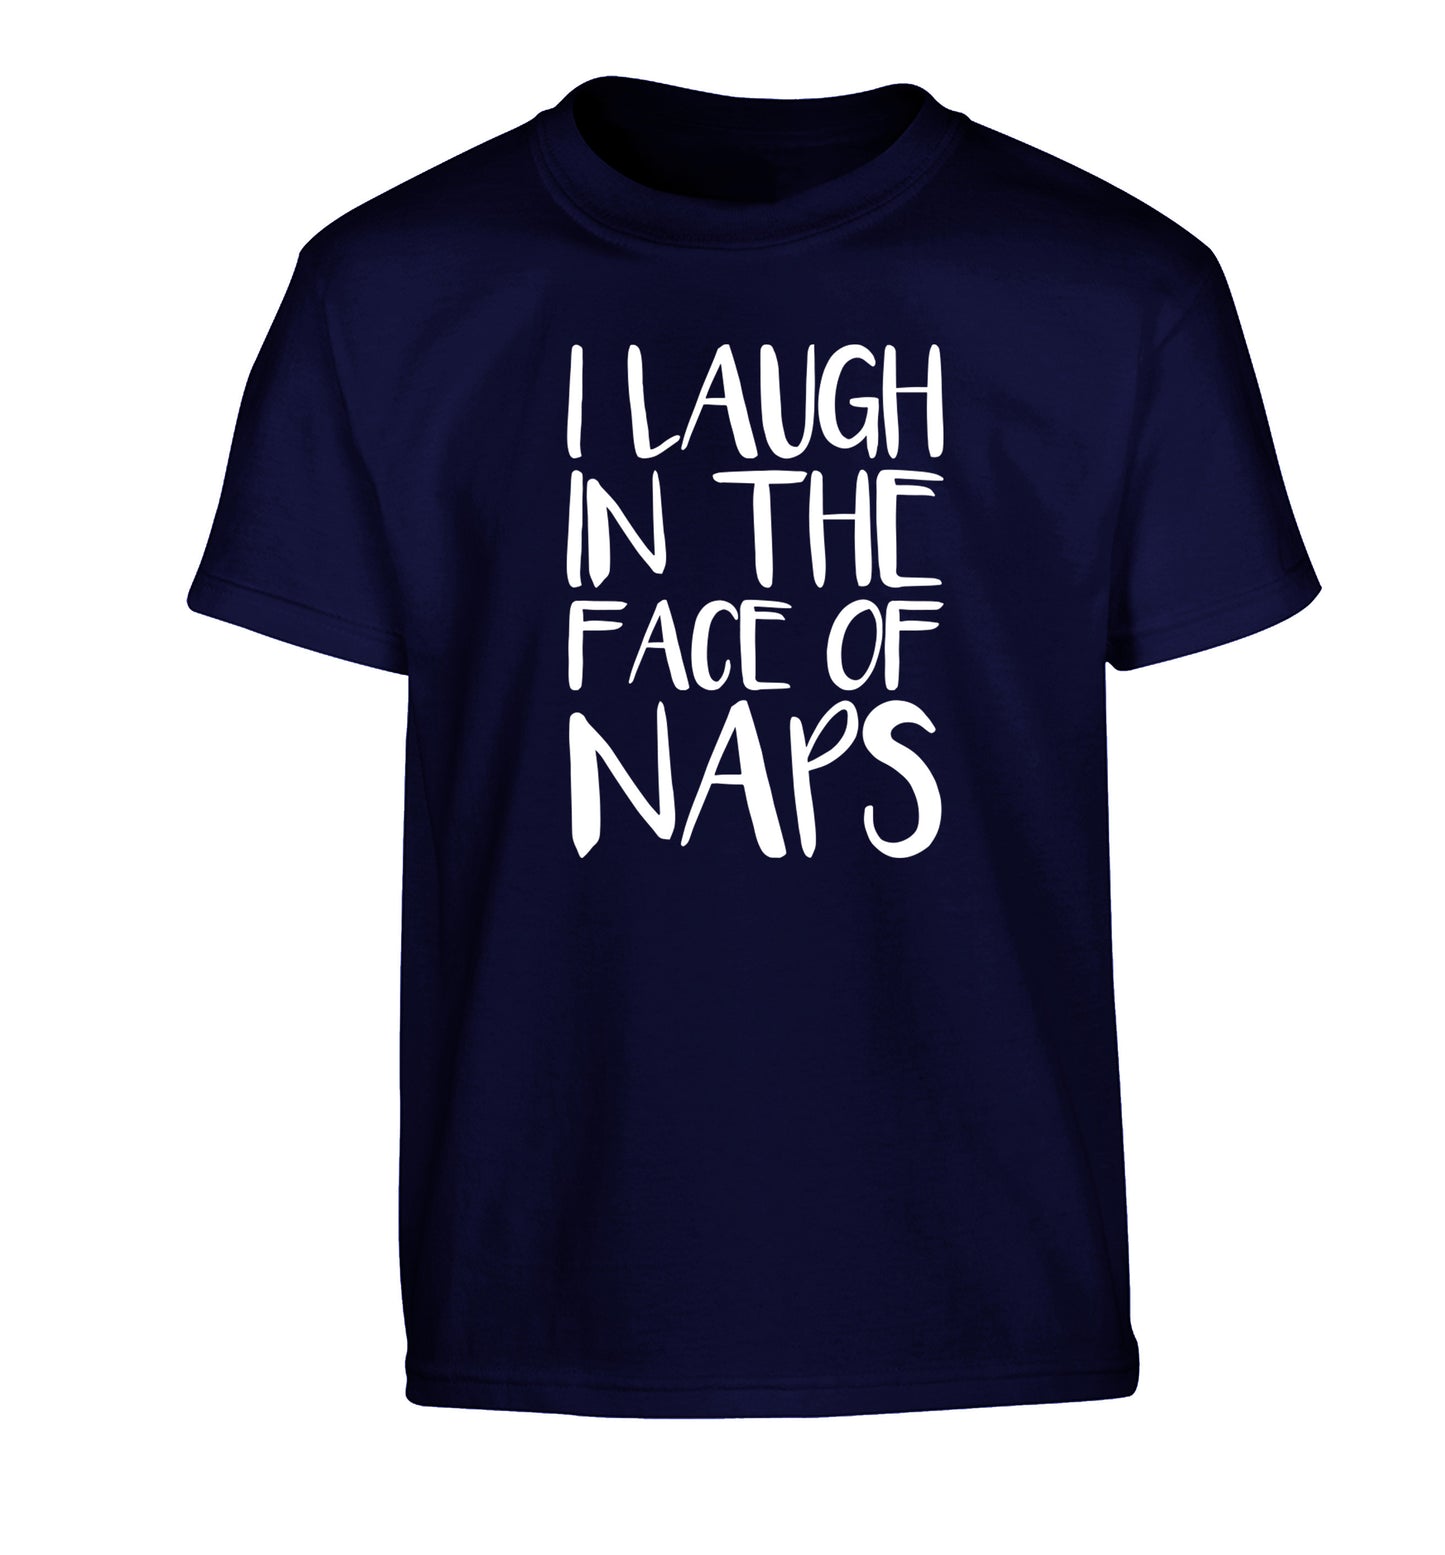 I laugh in the face of naps Children's navy Tshirt 12-14 Years